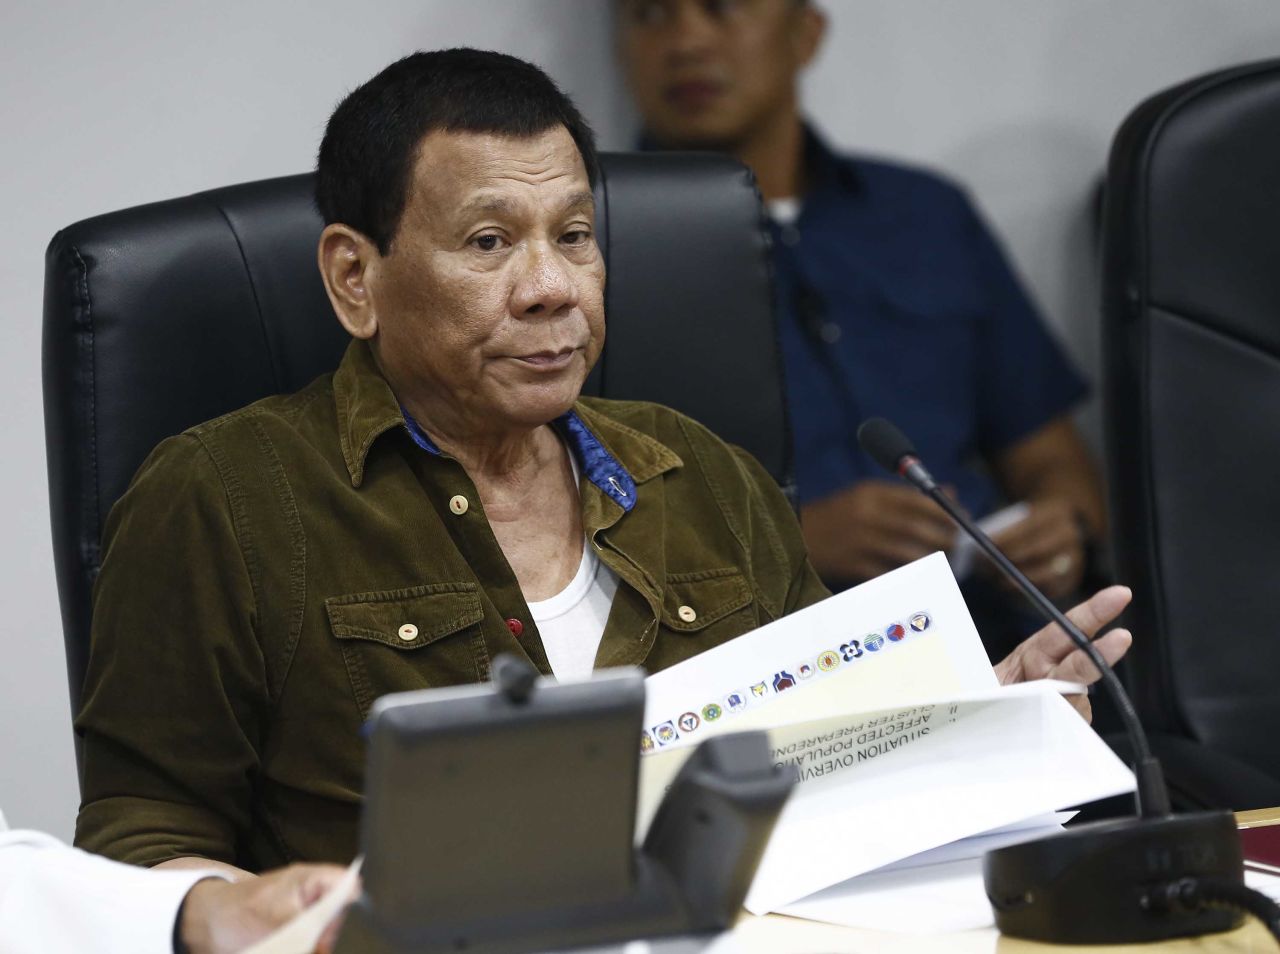 Philippine President Rodrigo Duterte arrives for a government briefing on the typhoon at the National Disaster Risk Reduction and Management Council in Quezon City on Thursday, September 13.